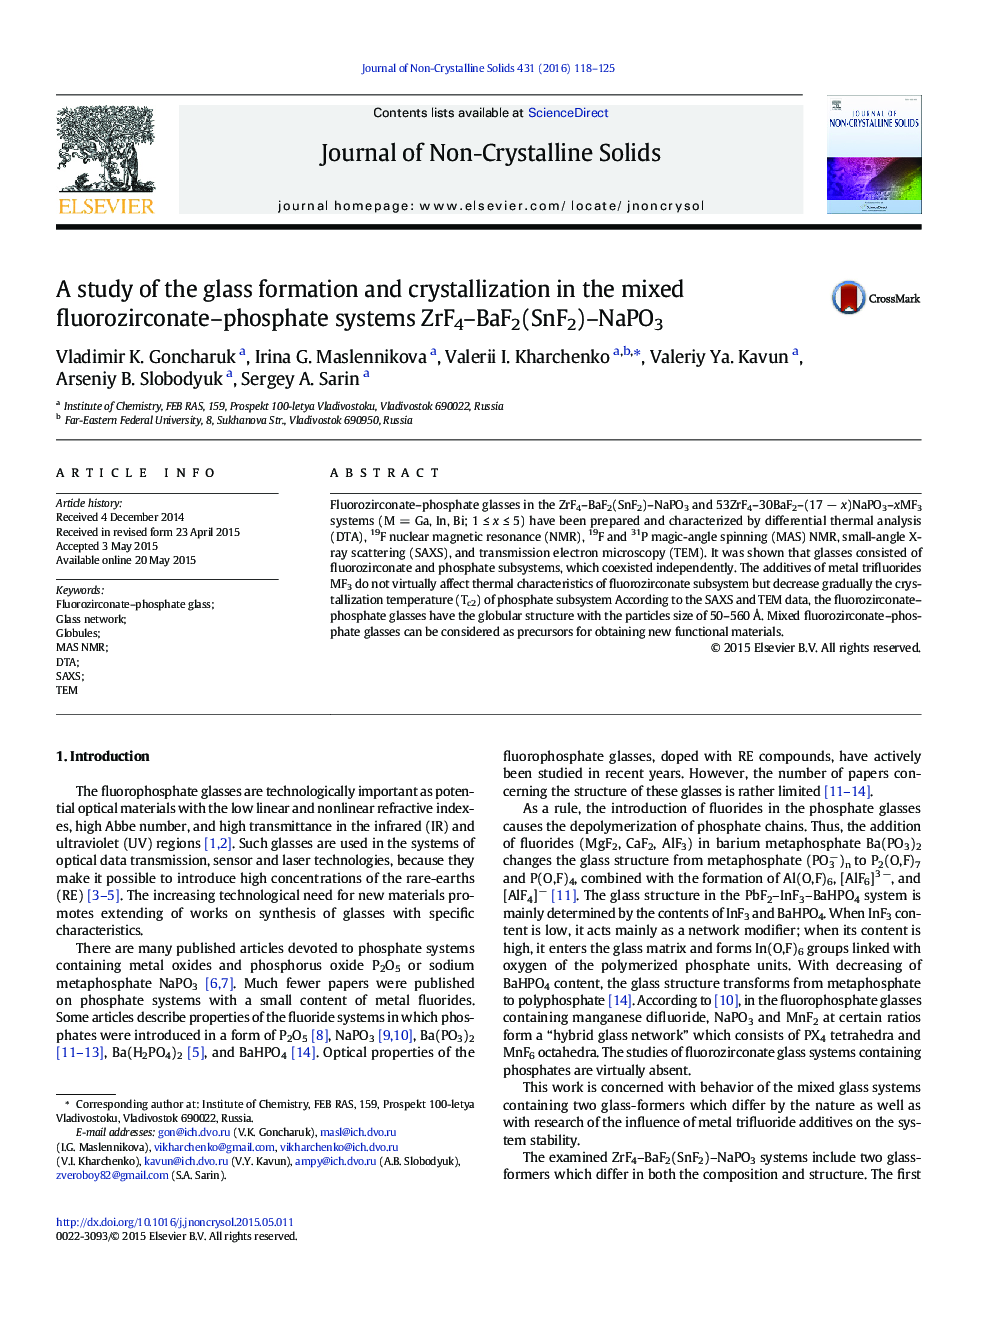 A study of the glass formation and crystallization in the mixed fluorozirconate–phosphate systems ZrF4–BaF2(SnF2)–NaPO3